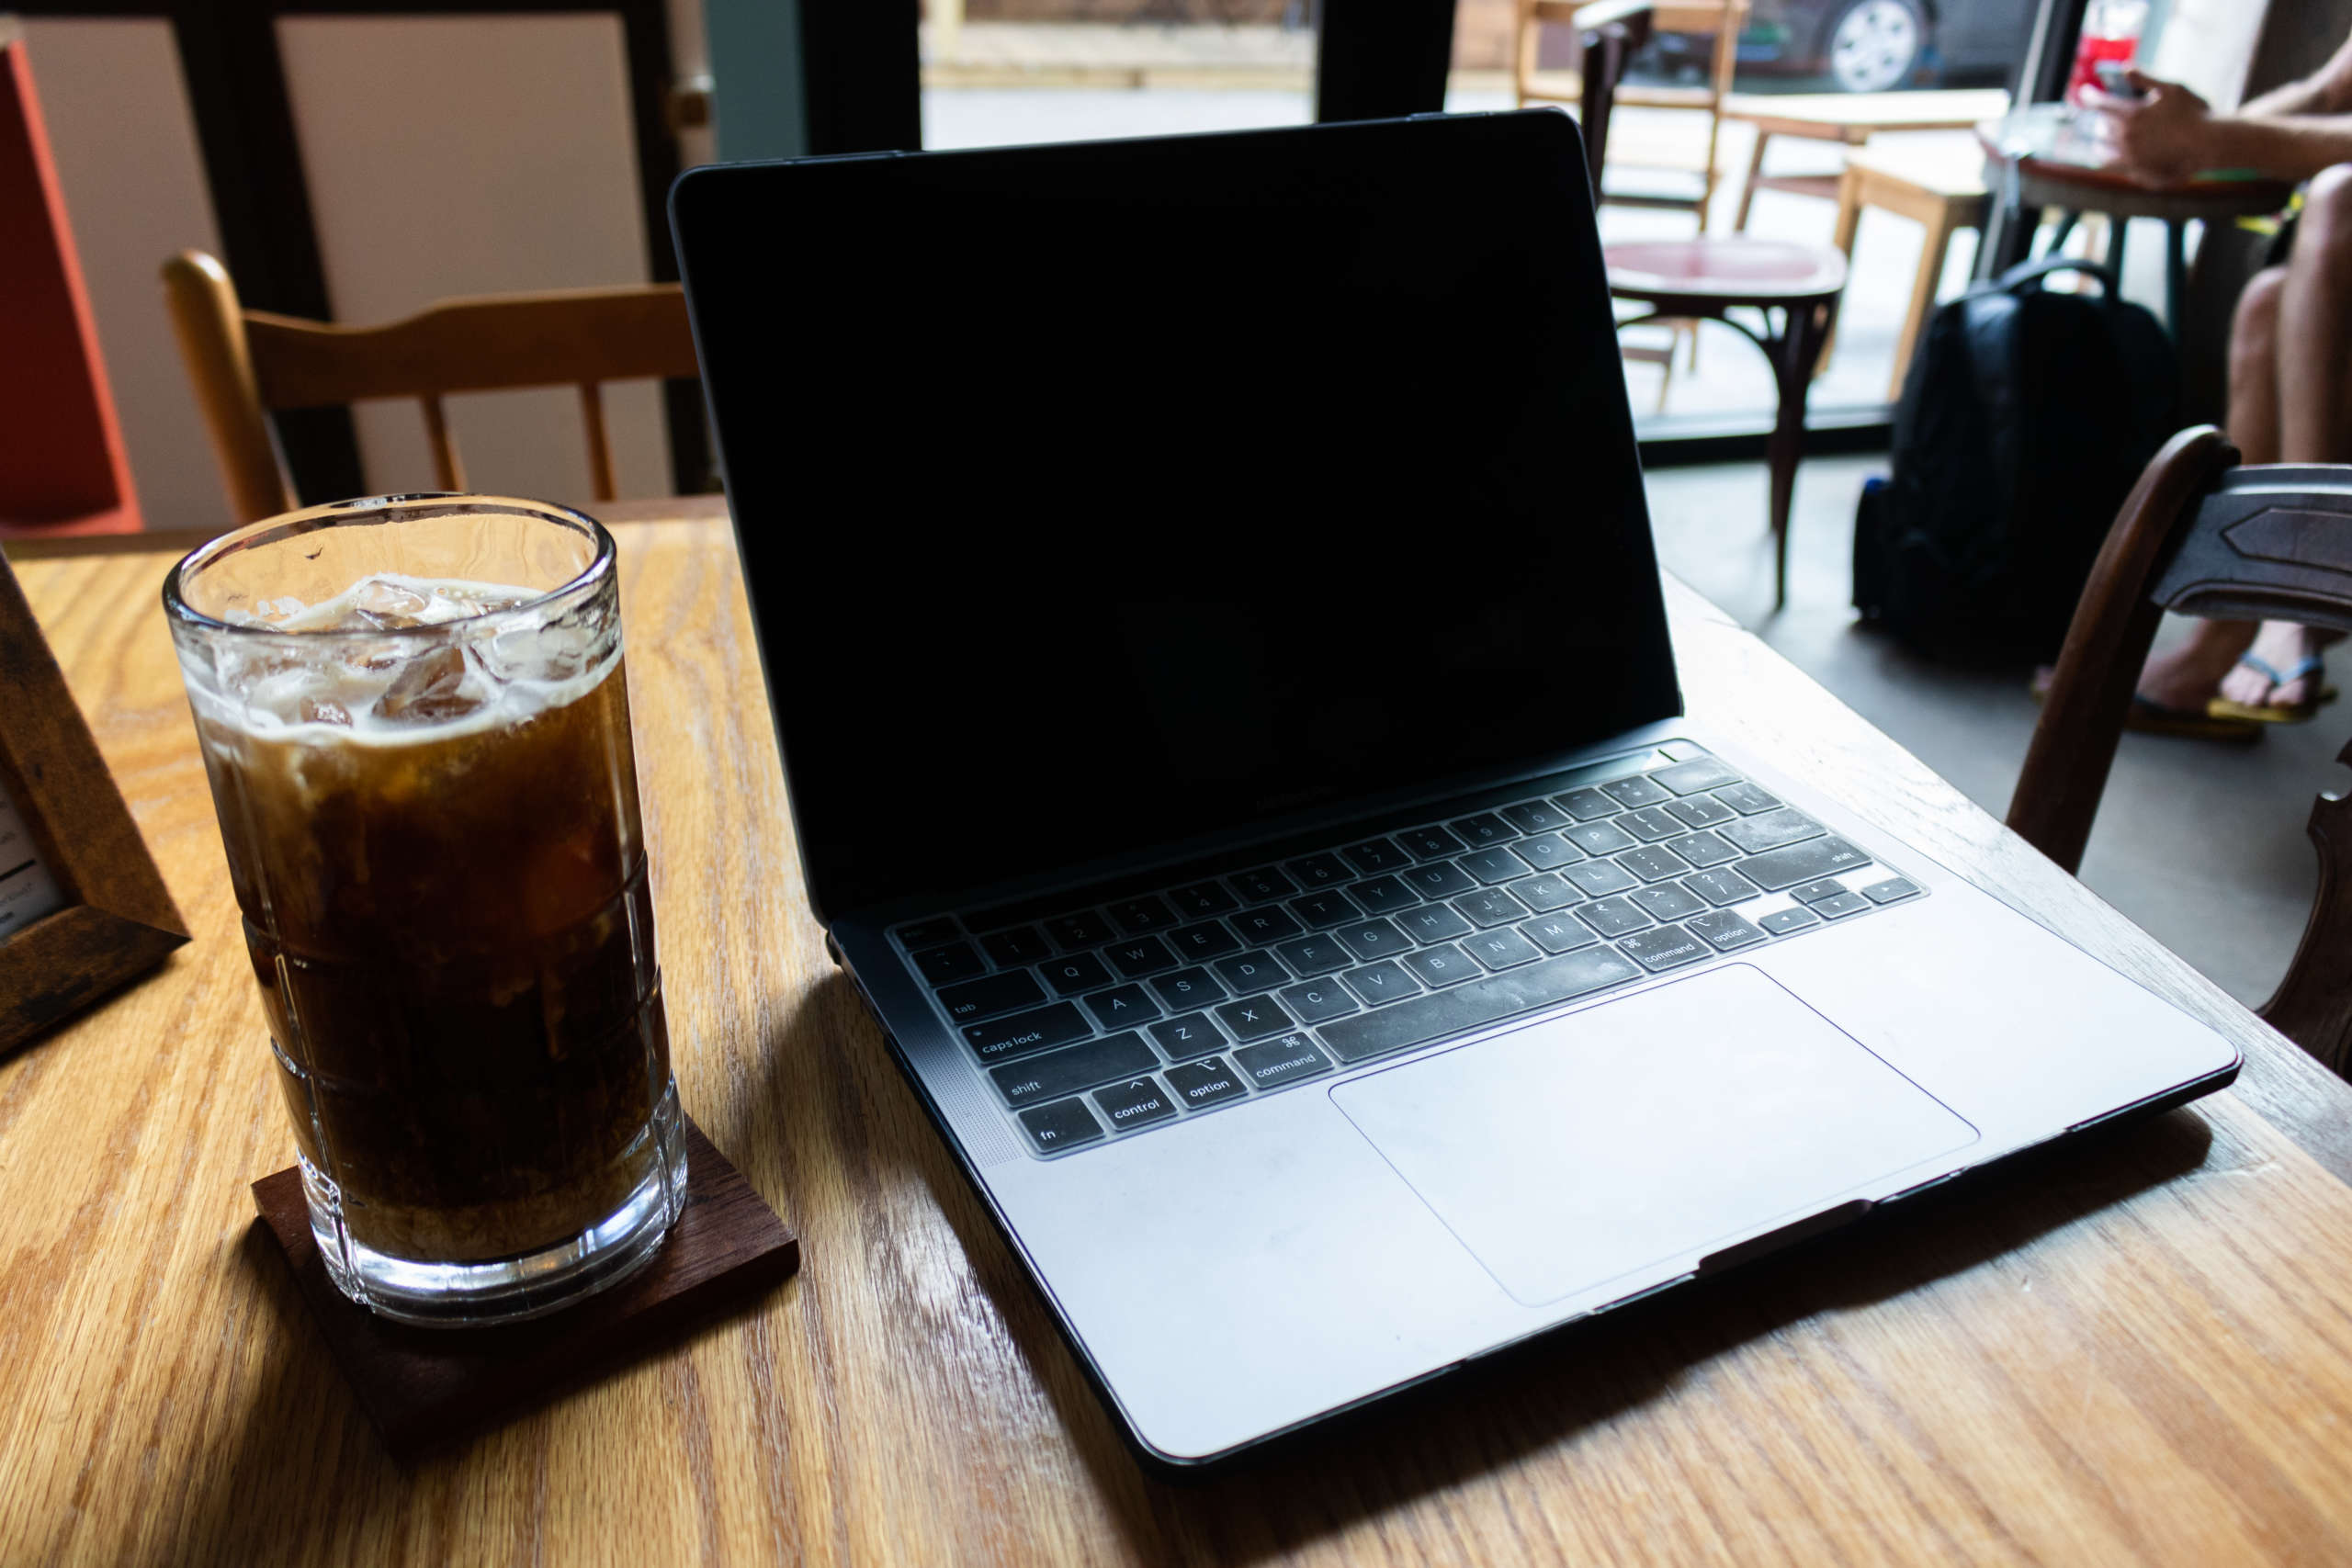 A laptop sits on a wooden table in a cafe.